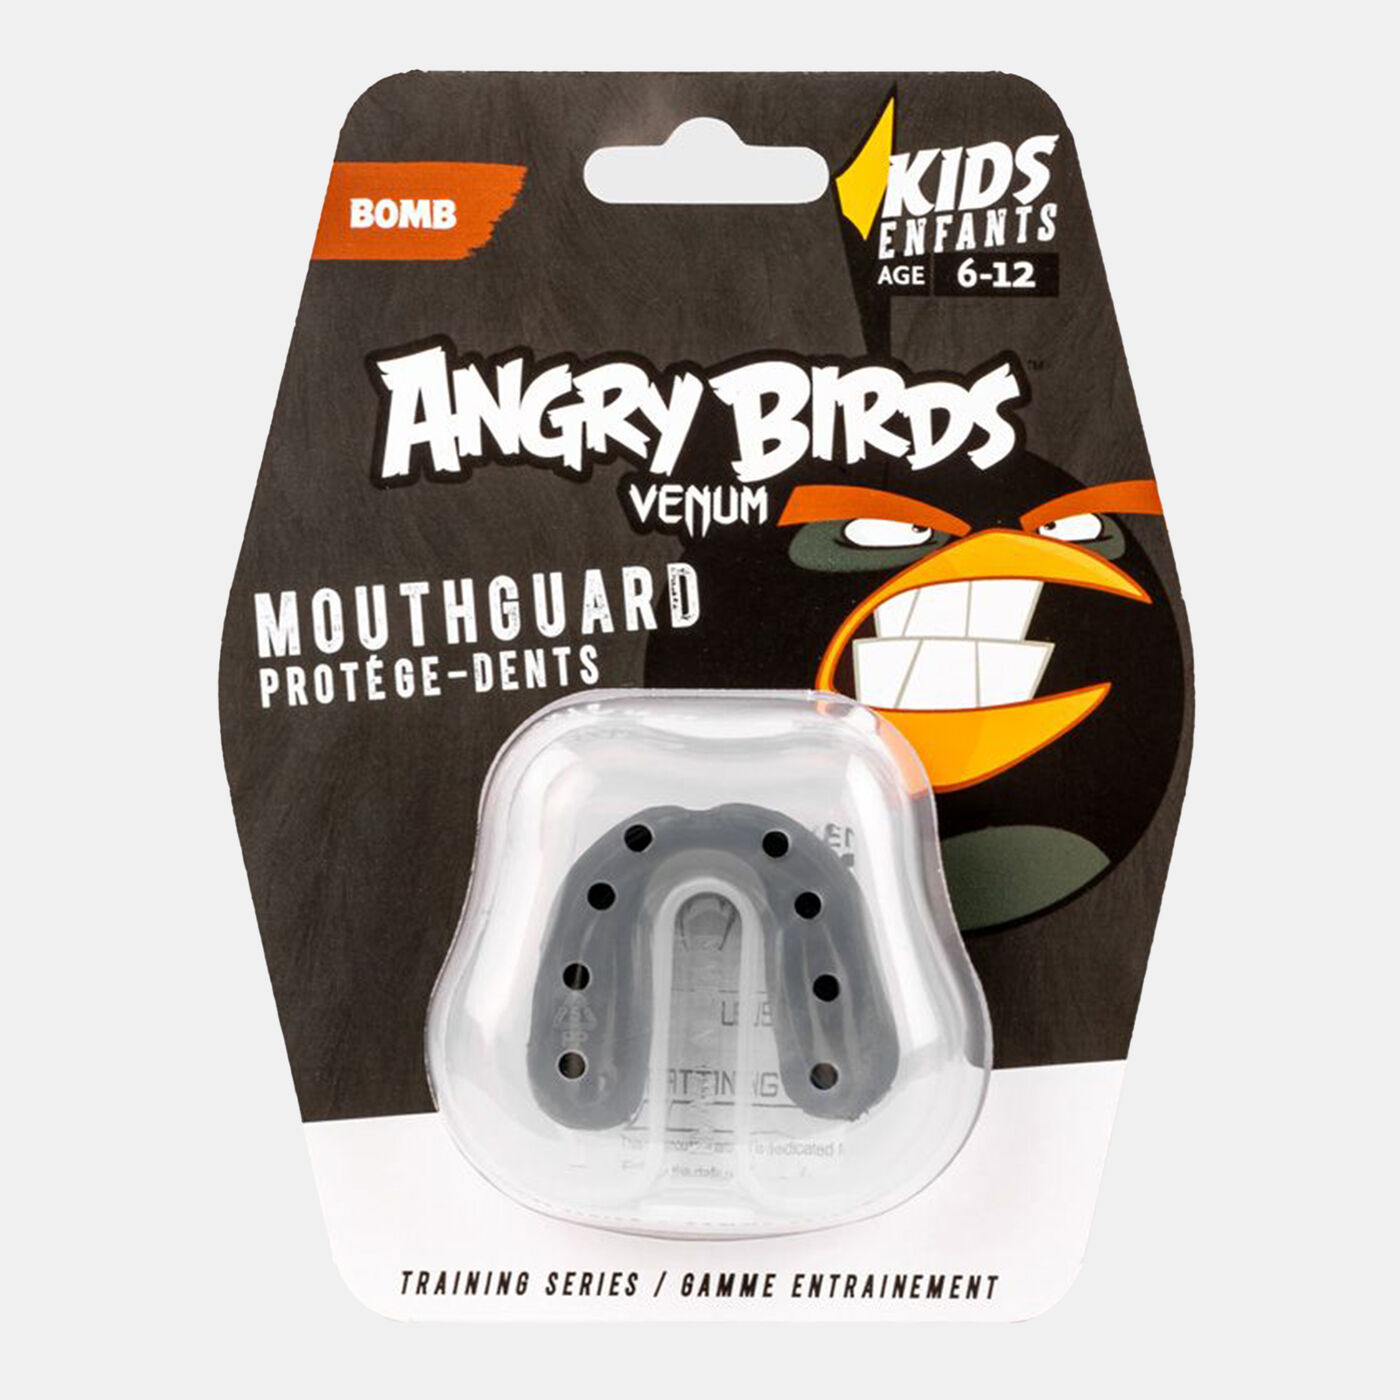 Kids' x Angry Birds Mouthguard